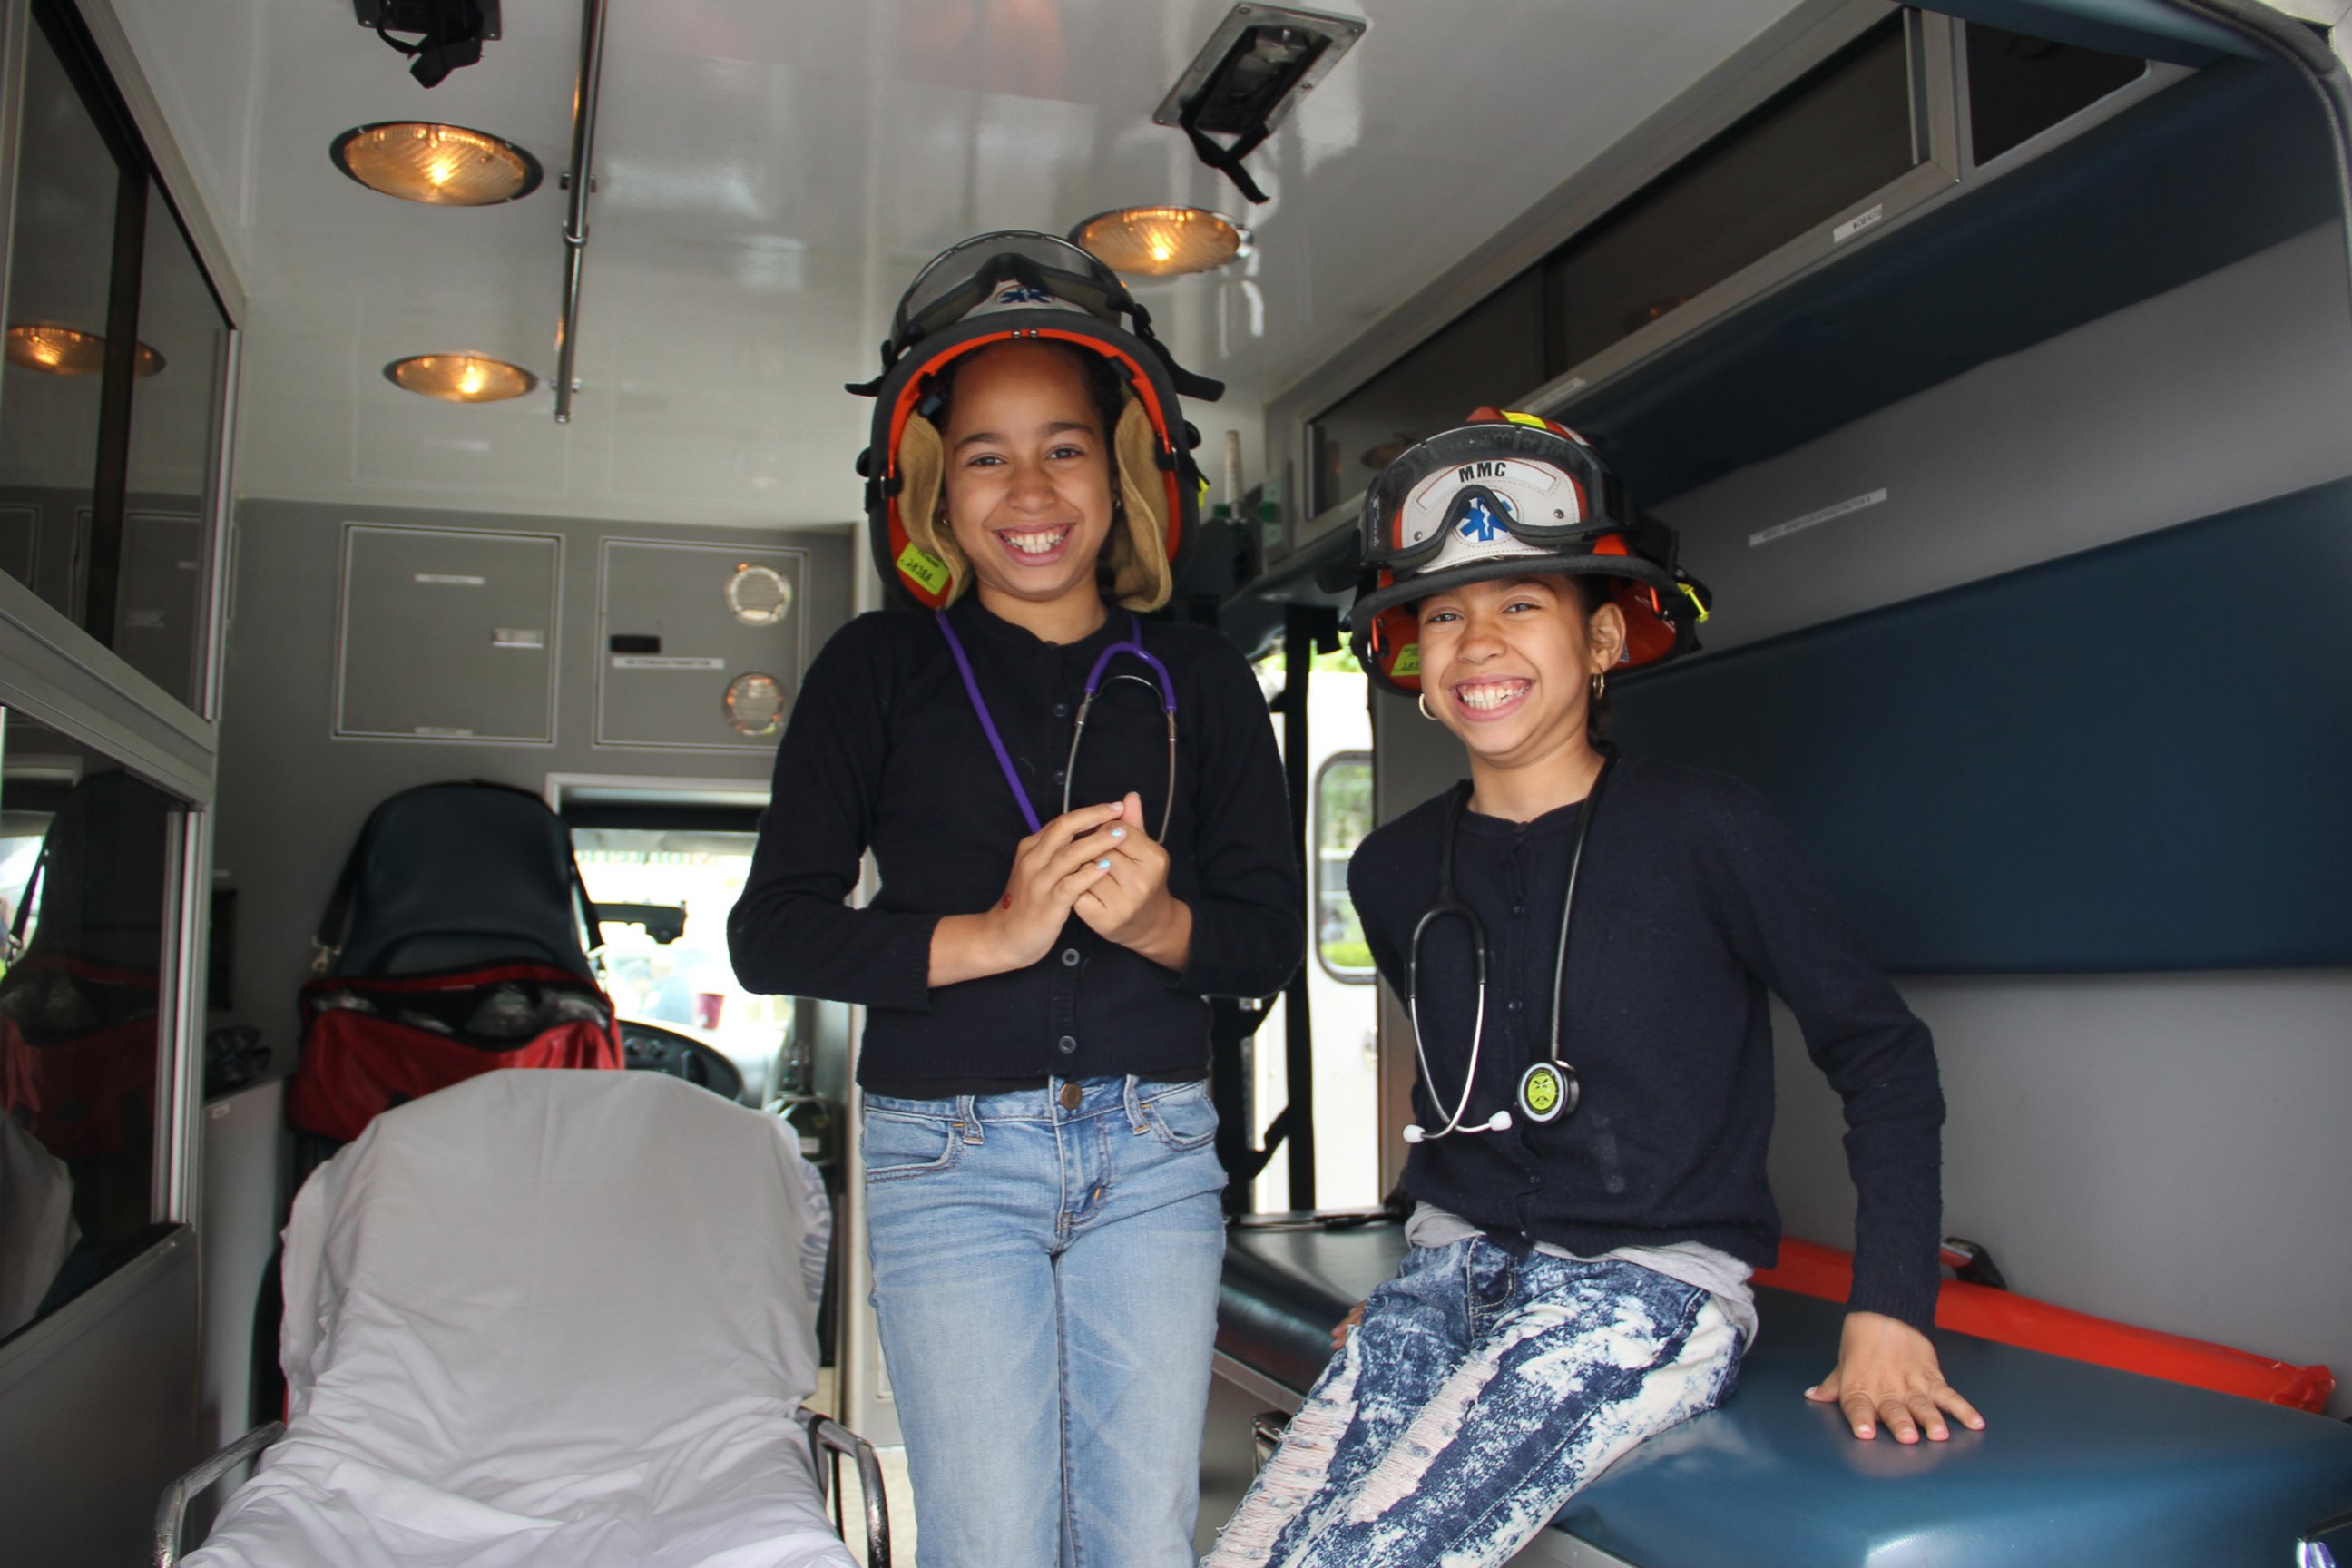 PHOTO: Ten-year-old twins Jayleen and Jayda check out an ambulance and try on EMT gear.